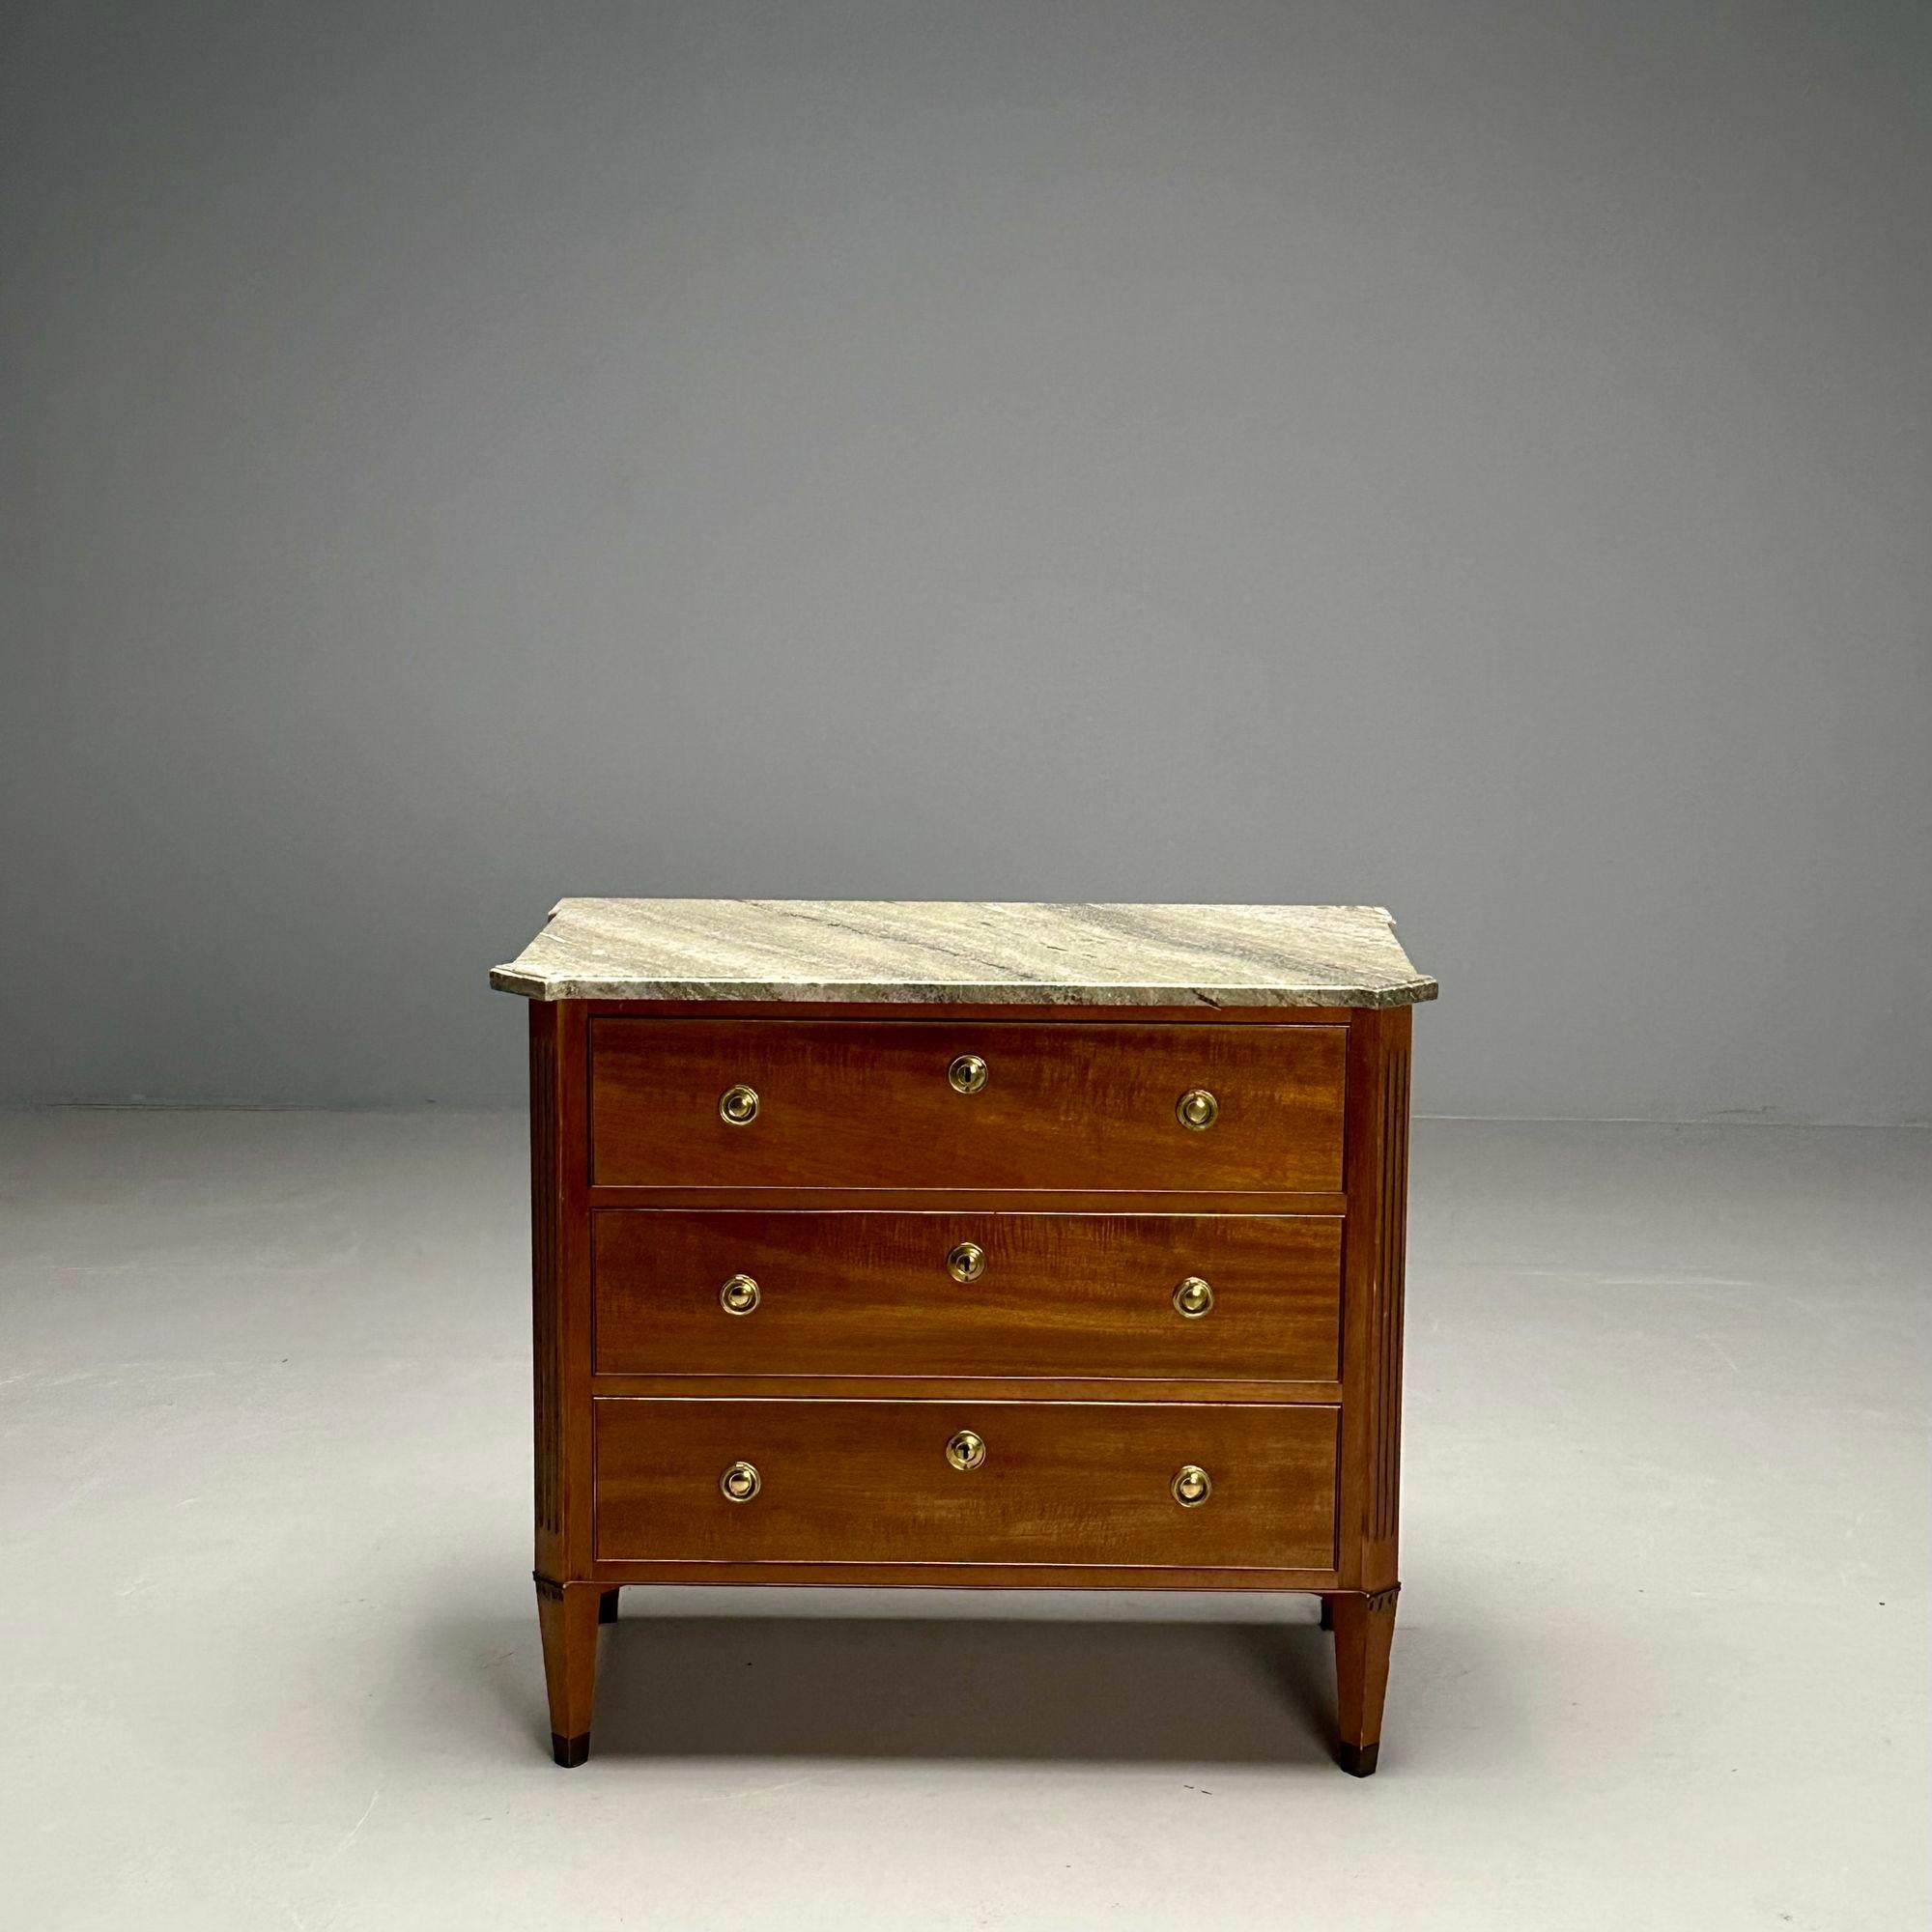 Gustavian, Louis XVI Style, Commode, Mahogany, Marble, Brass, Sweden, 1980s

Gustavian chest of drawers designed and produced in Sweden in the later half of the 20th century. This example has a marble top, Mahogany veneer, fluted sides, and three